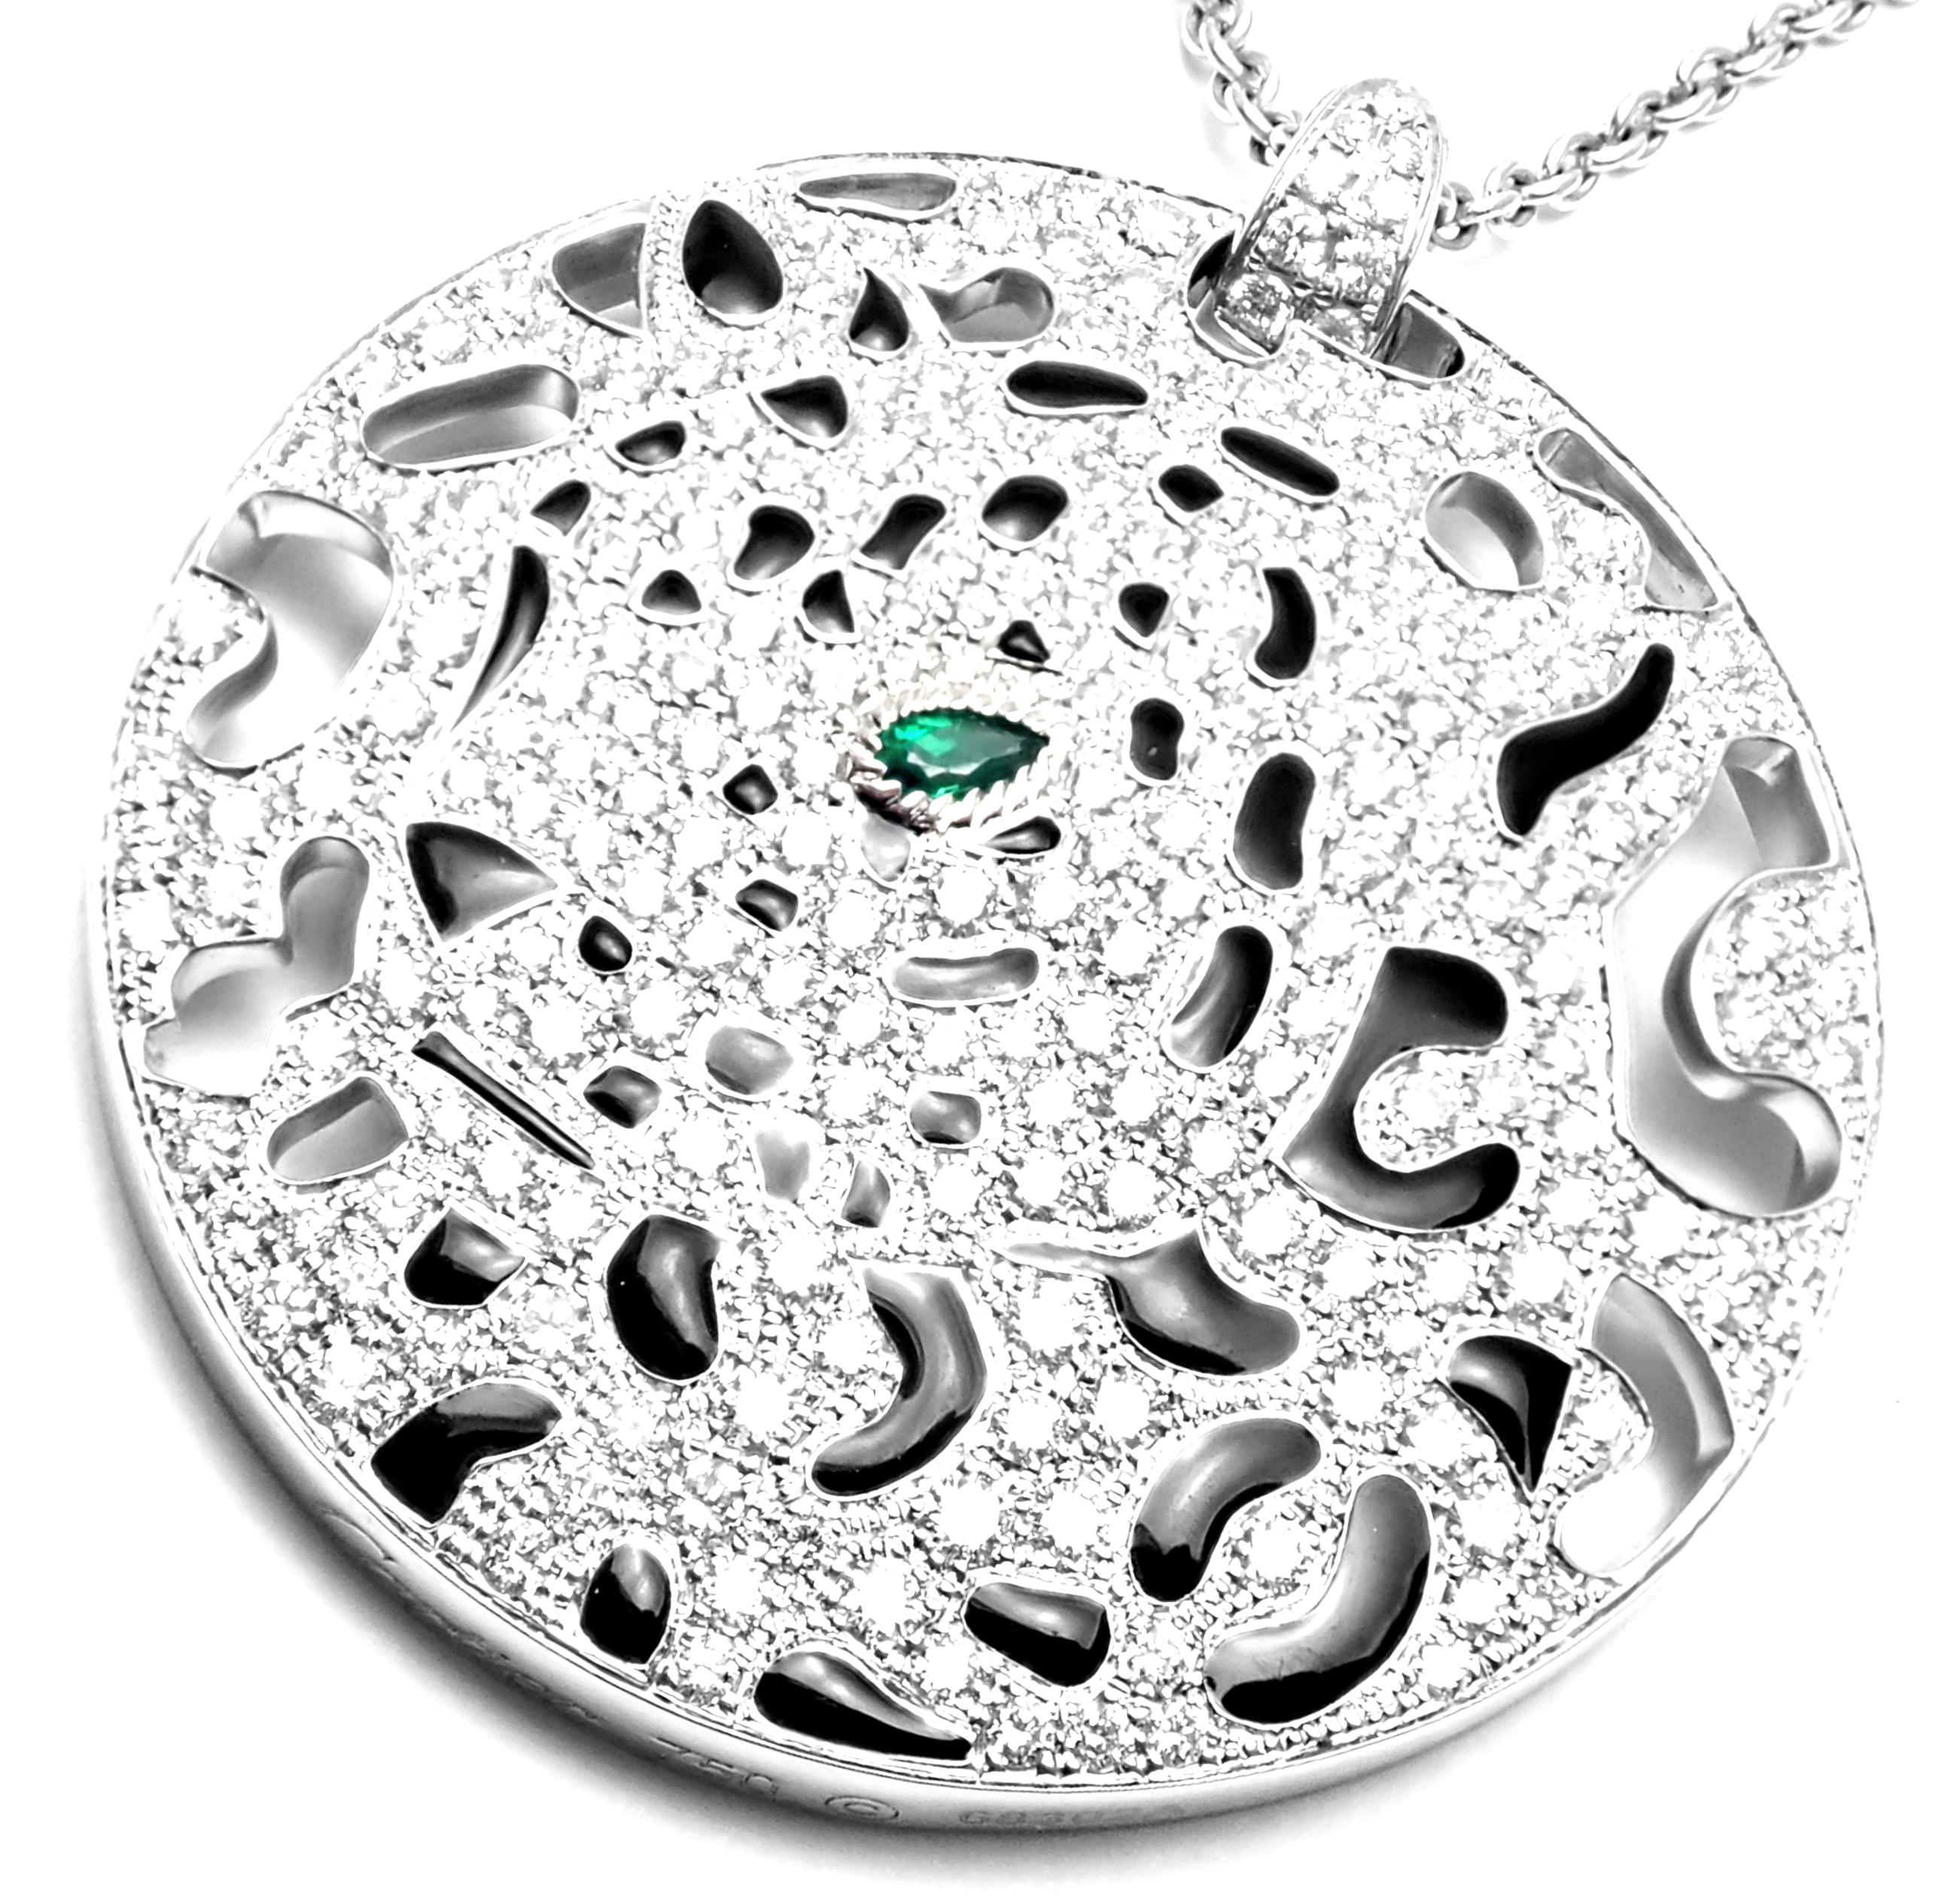 18k White Gold Diamond Emerald Panther Pendant Necklace by Cartier.
With 222 round brilliant cut diamonds VVS1 clarity, E color total weight approx. 3ct and Emerald in the eye.
This necklace is in mint condition and comes with Cartier certificate